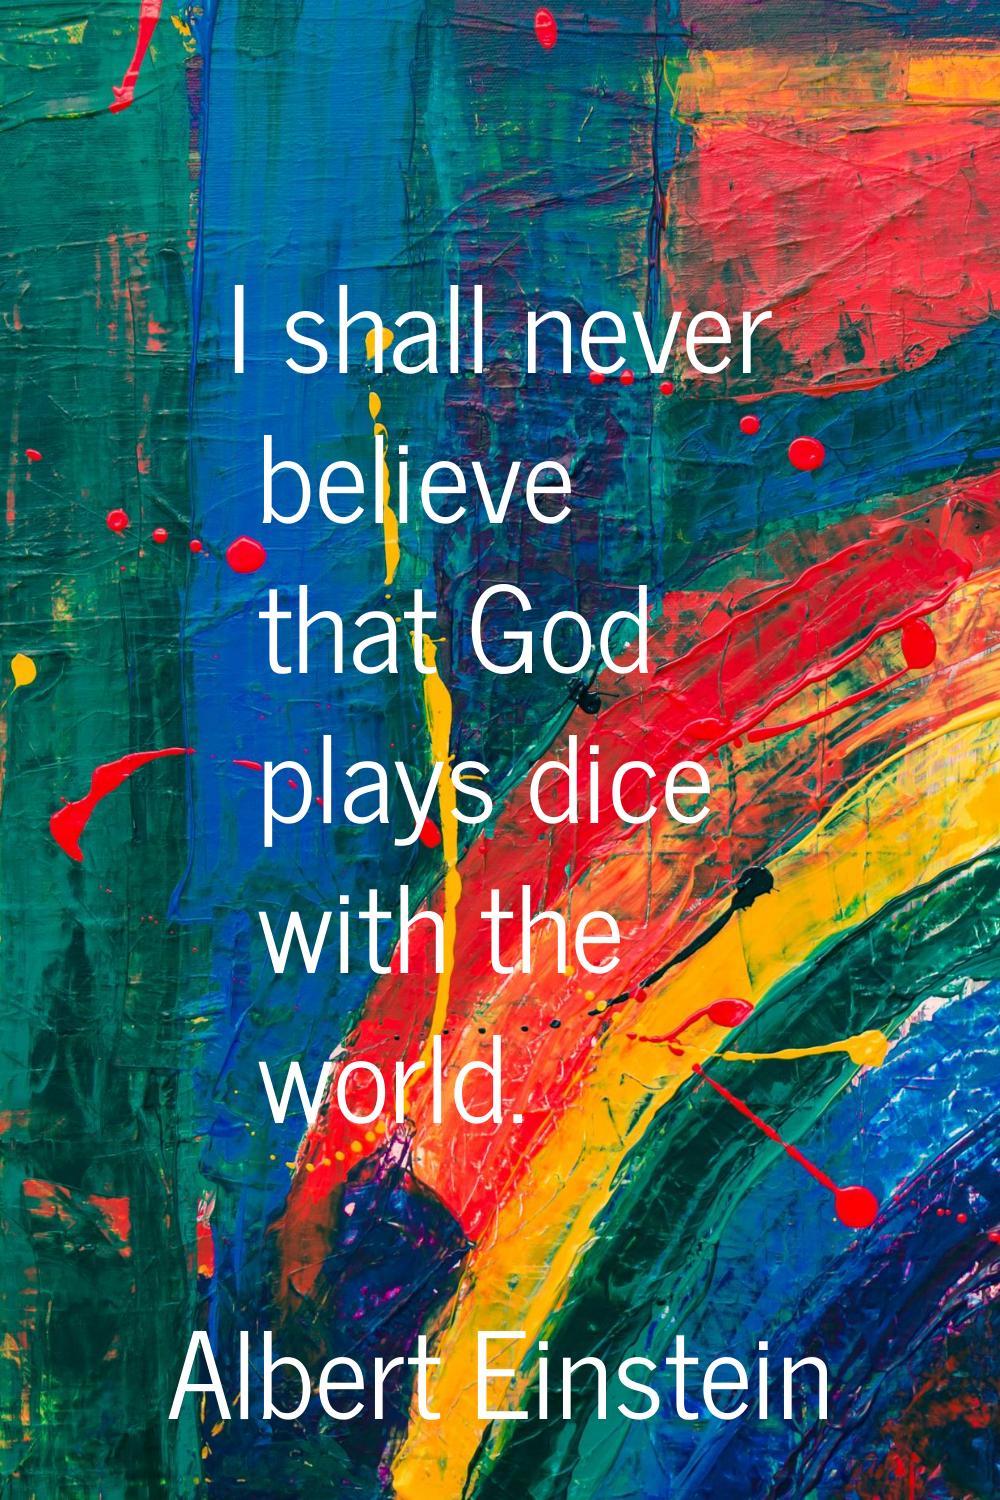 I shall never believe that God plays dice with the world.